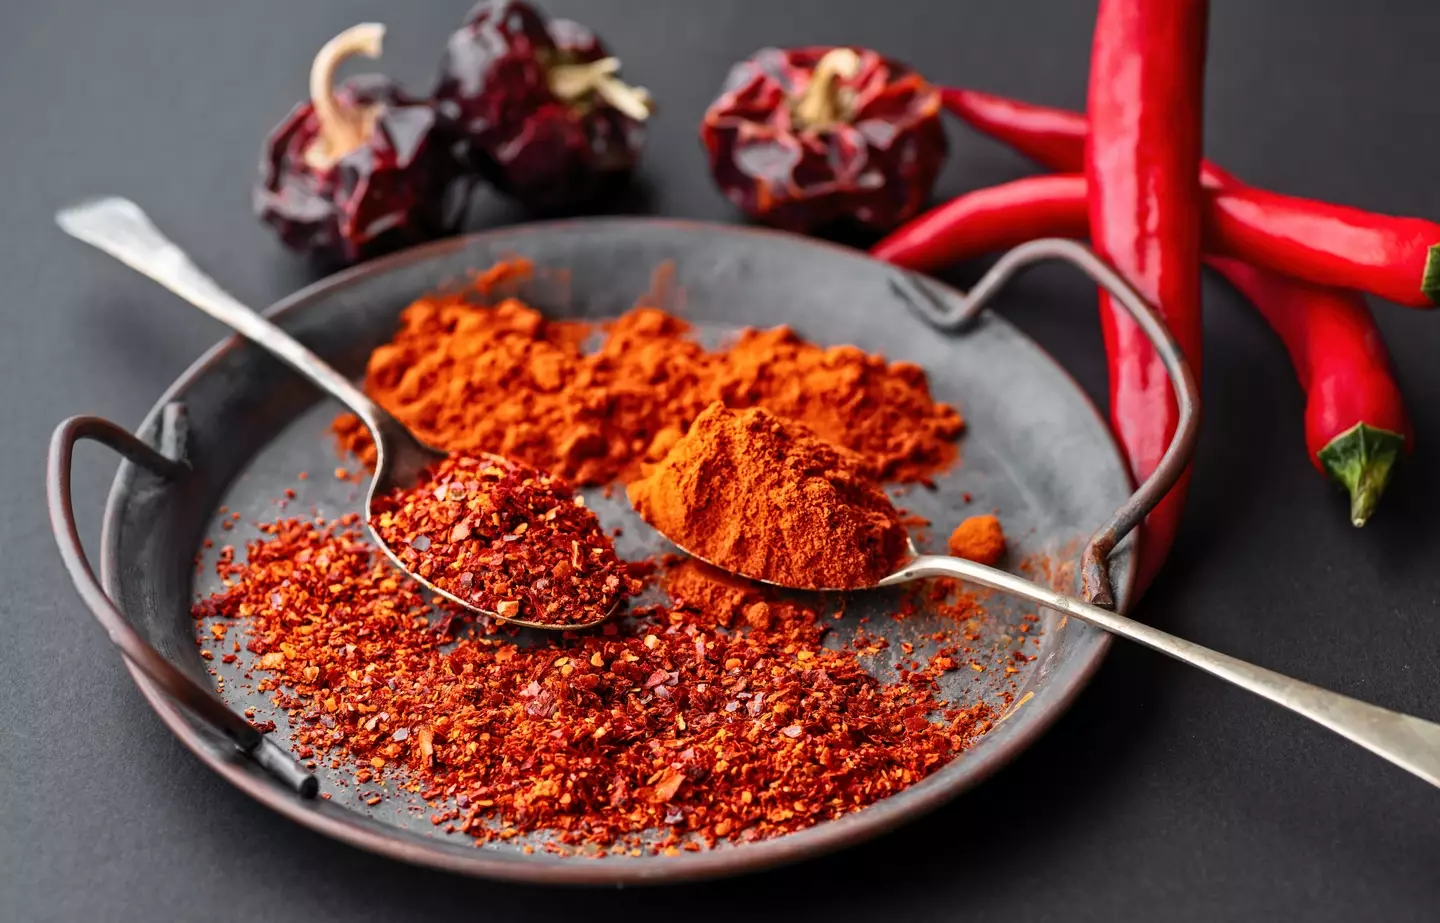 So, what is paprika made of?